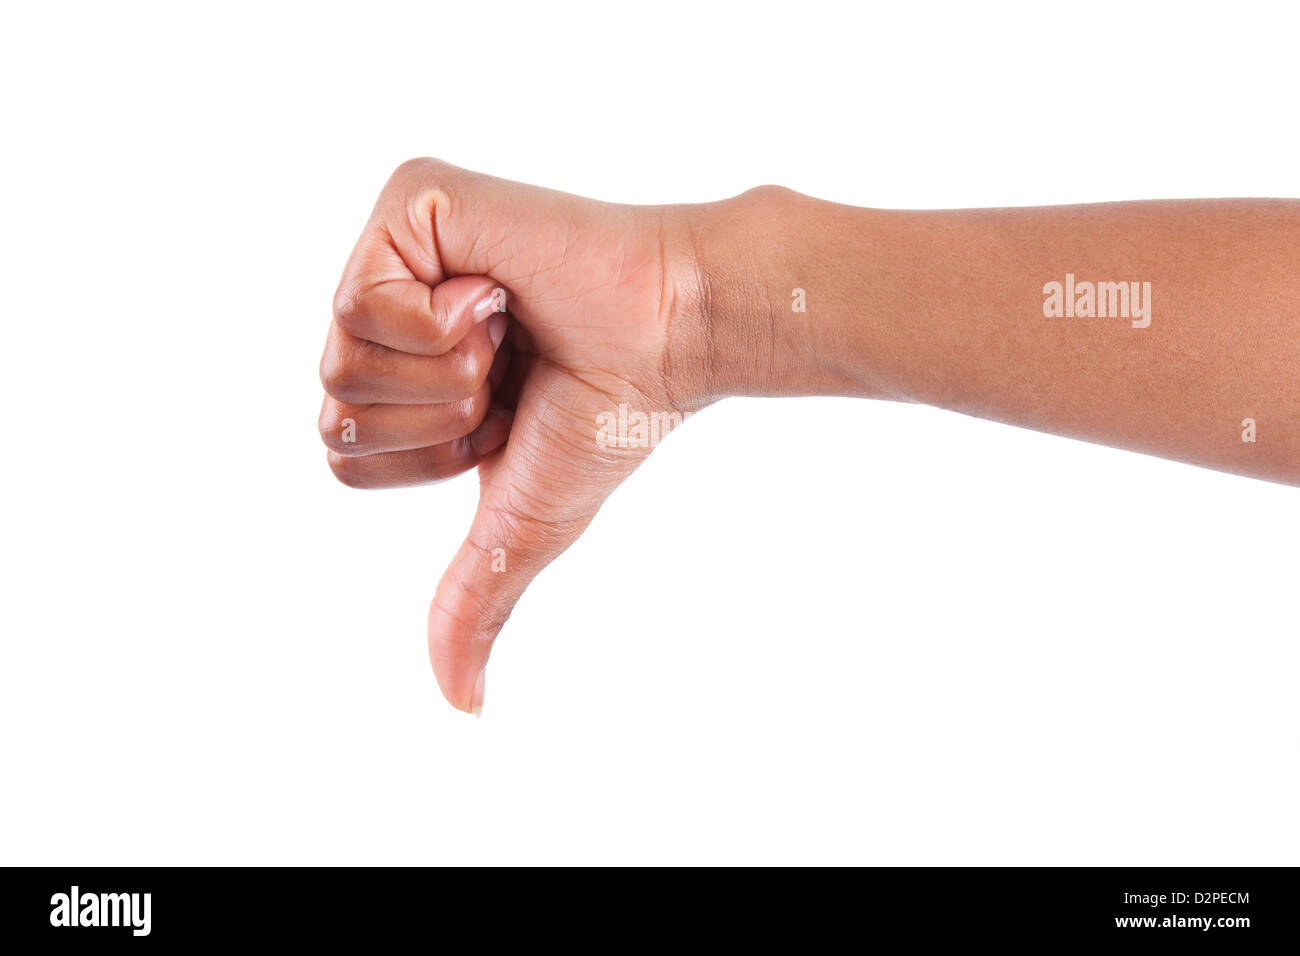 African American woman Hand making thumbs down gesture, isolated on white background Stock Photo